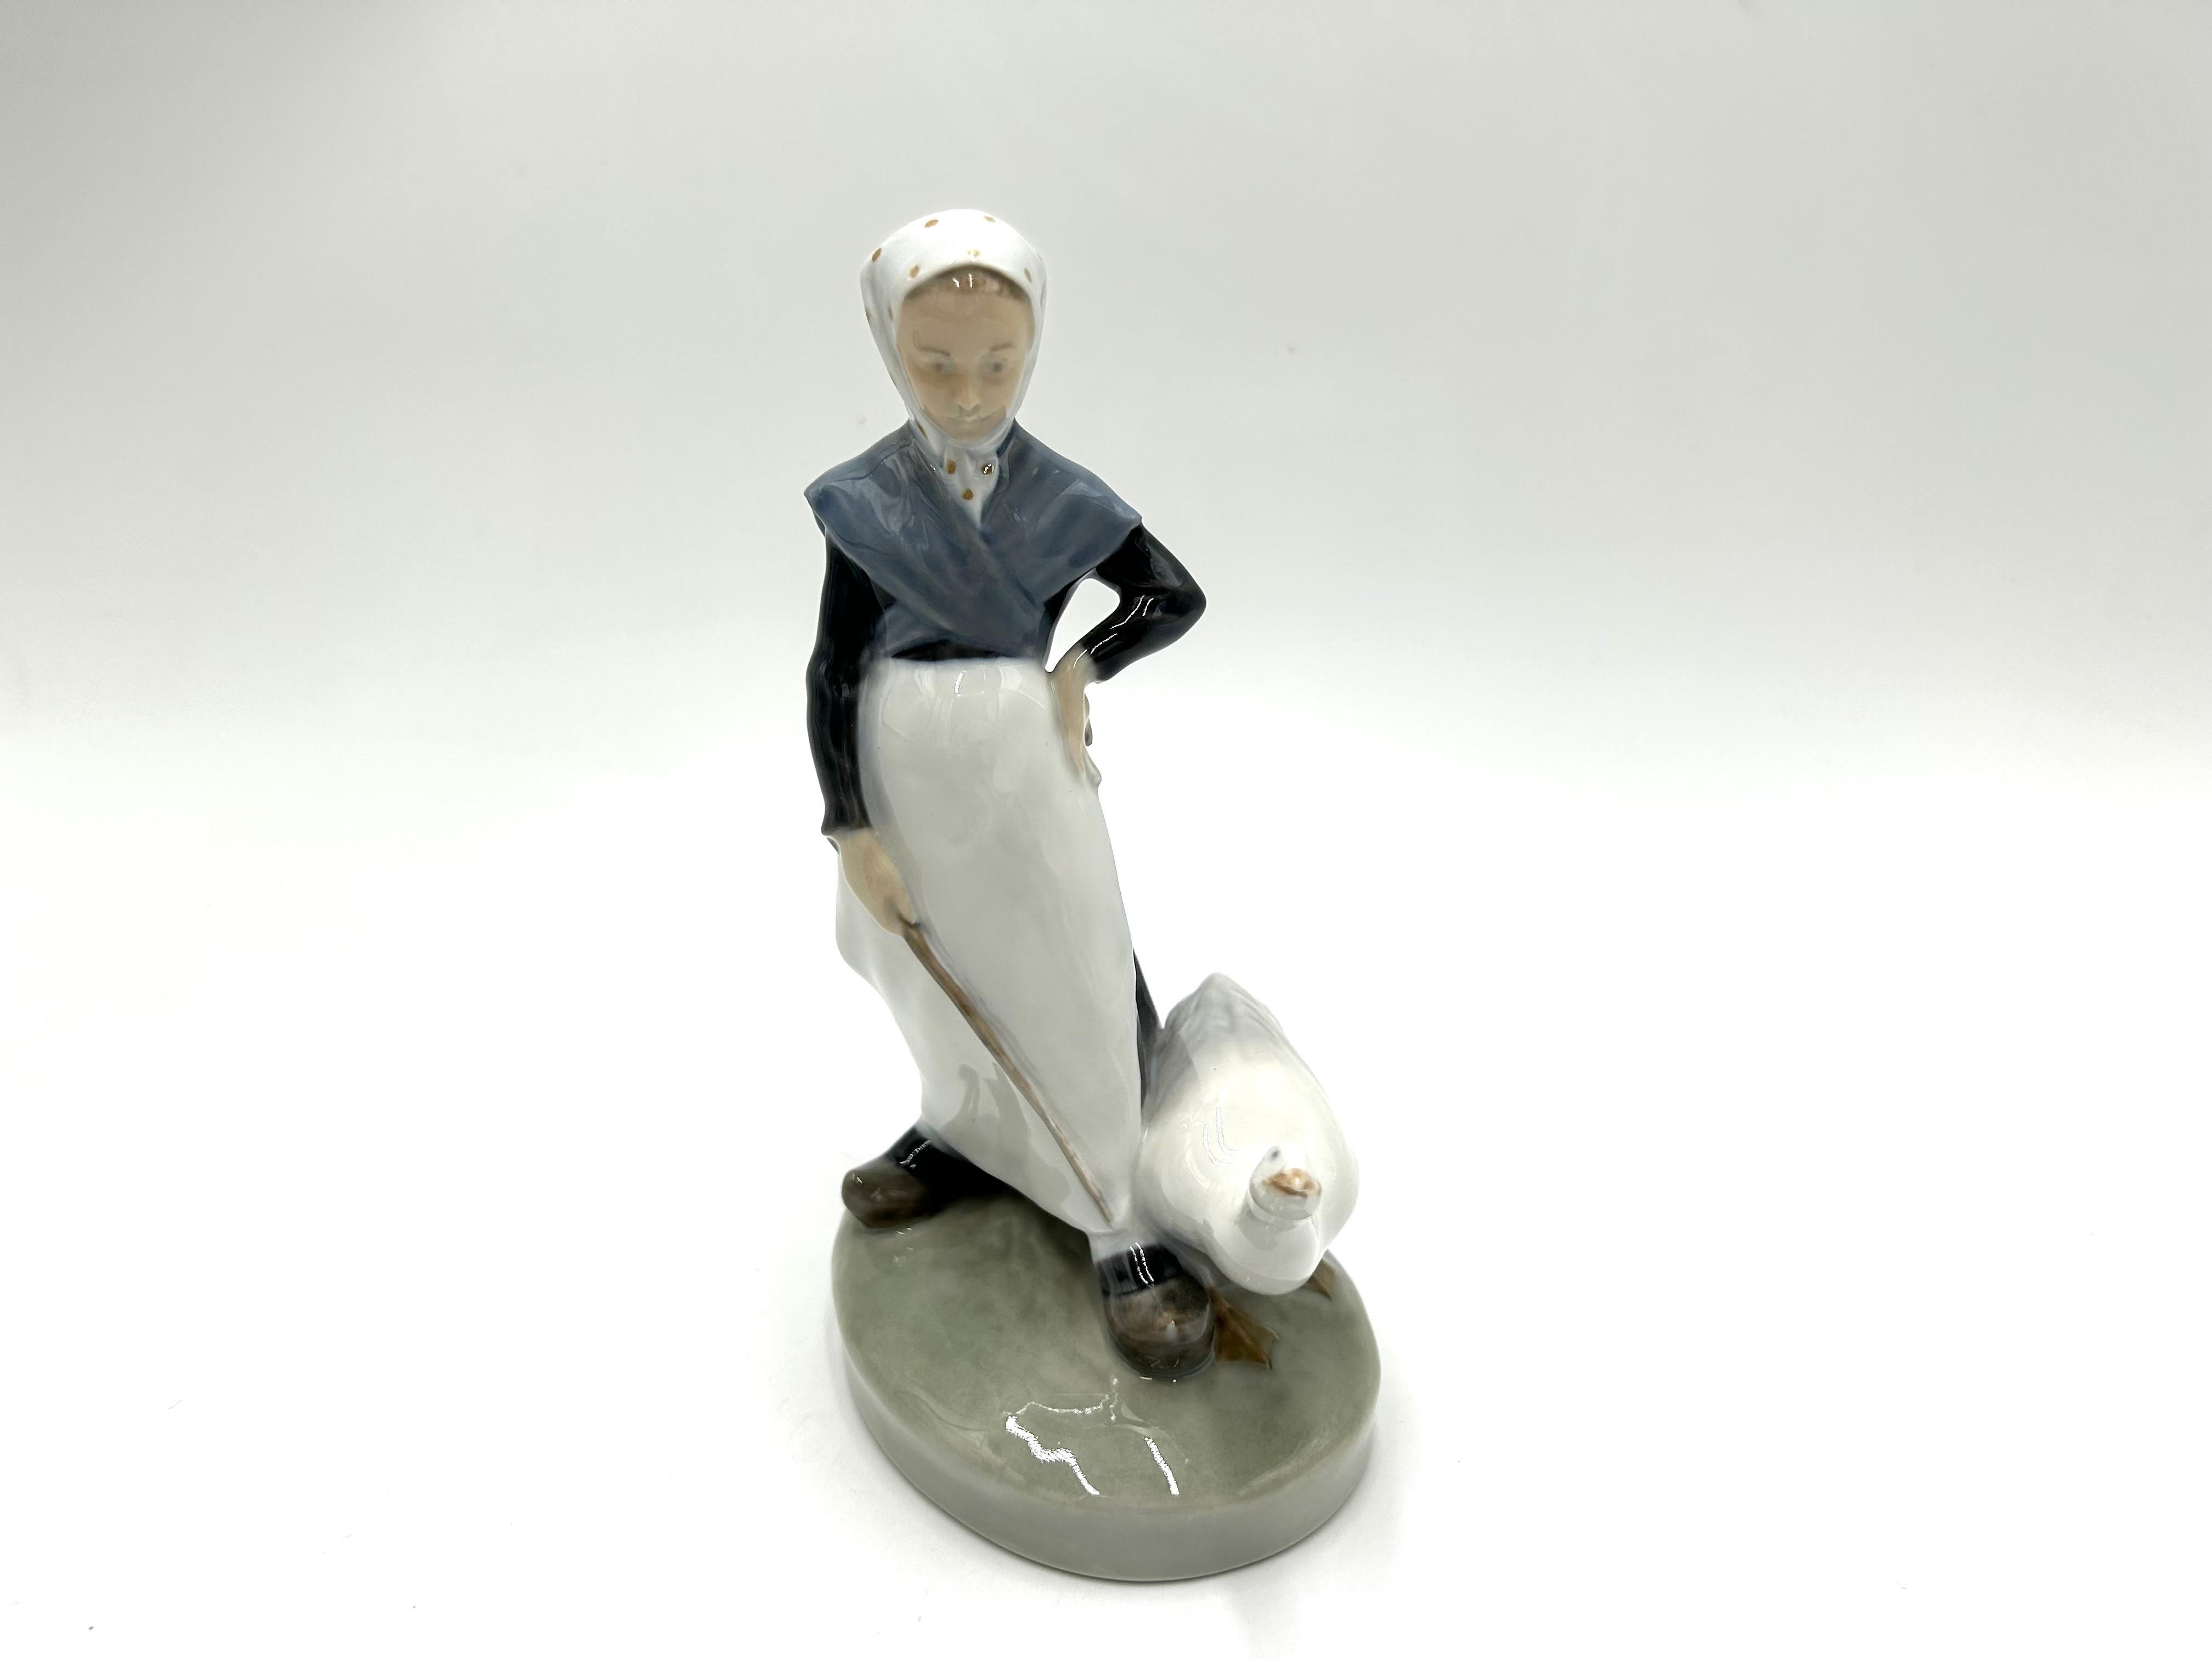 Porcelain figurine of a girl with a goose.
Produced by the Danish manufacture Royal Copenhagen
The mark uses 1961.
Very good condition without damage
Measures : Height: 19cm
Width: 10cm
Depth: 8cm.